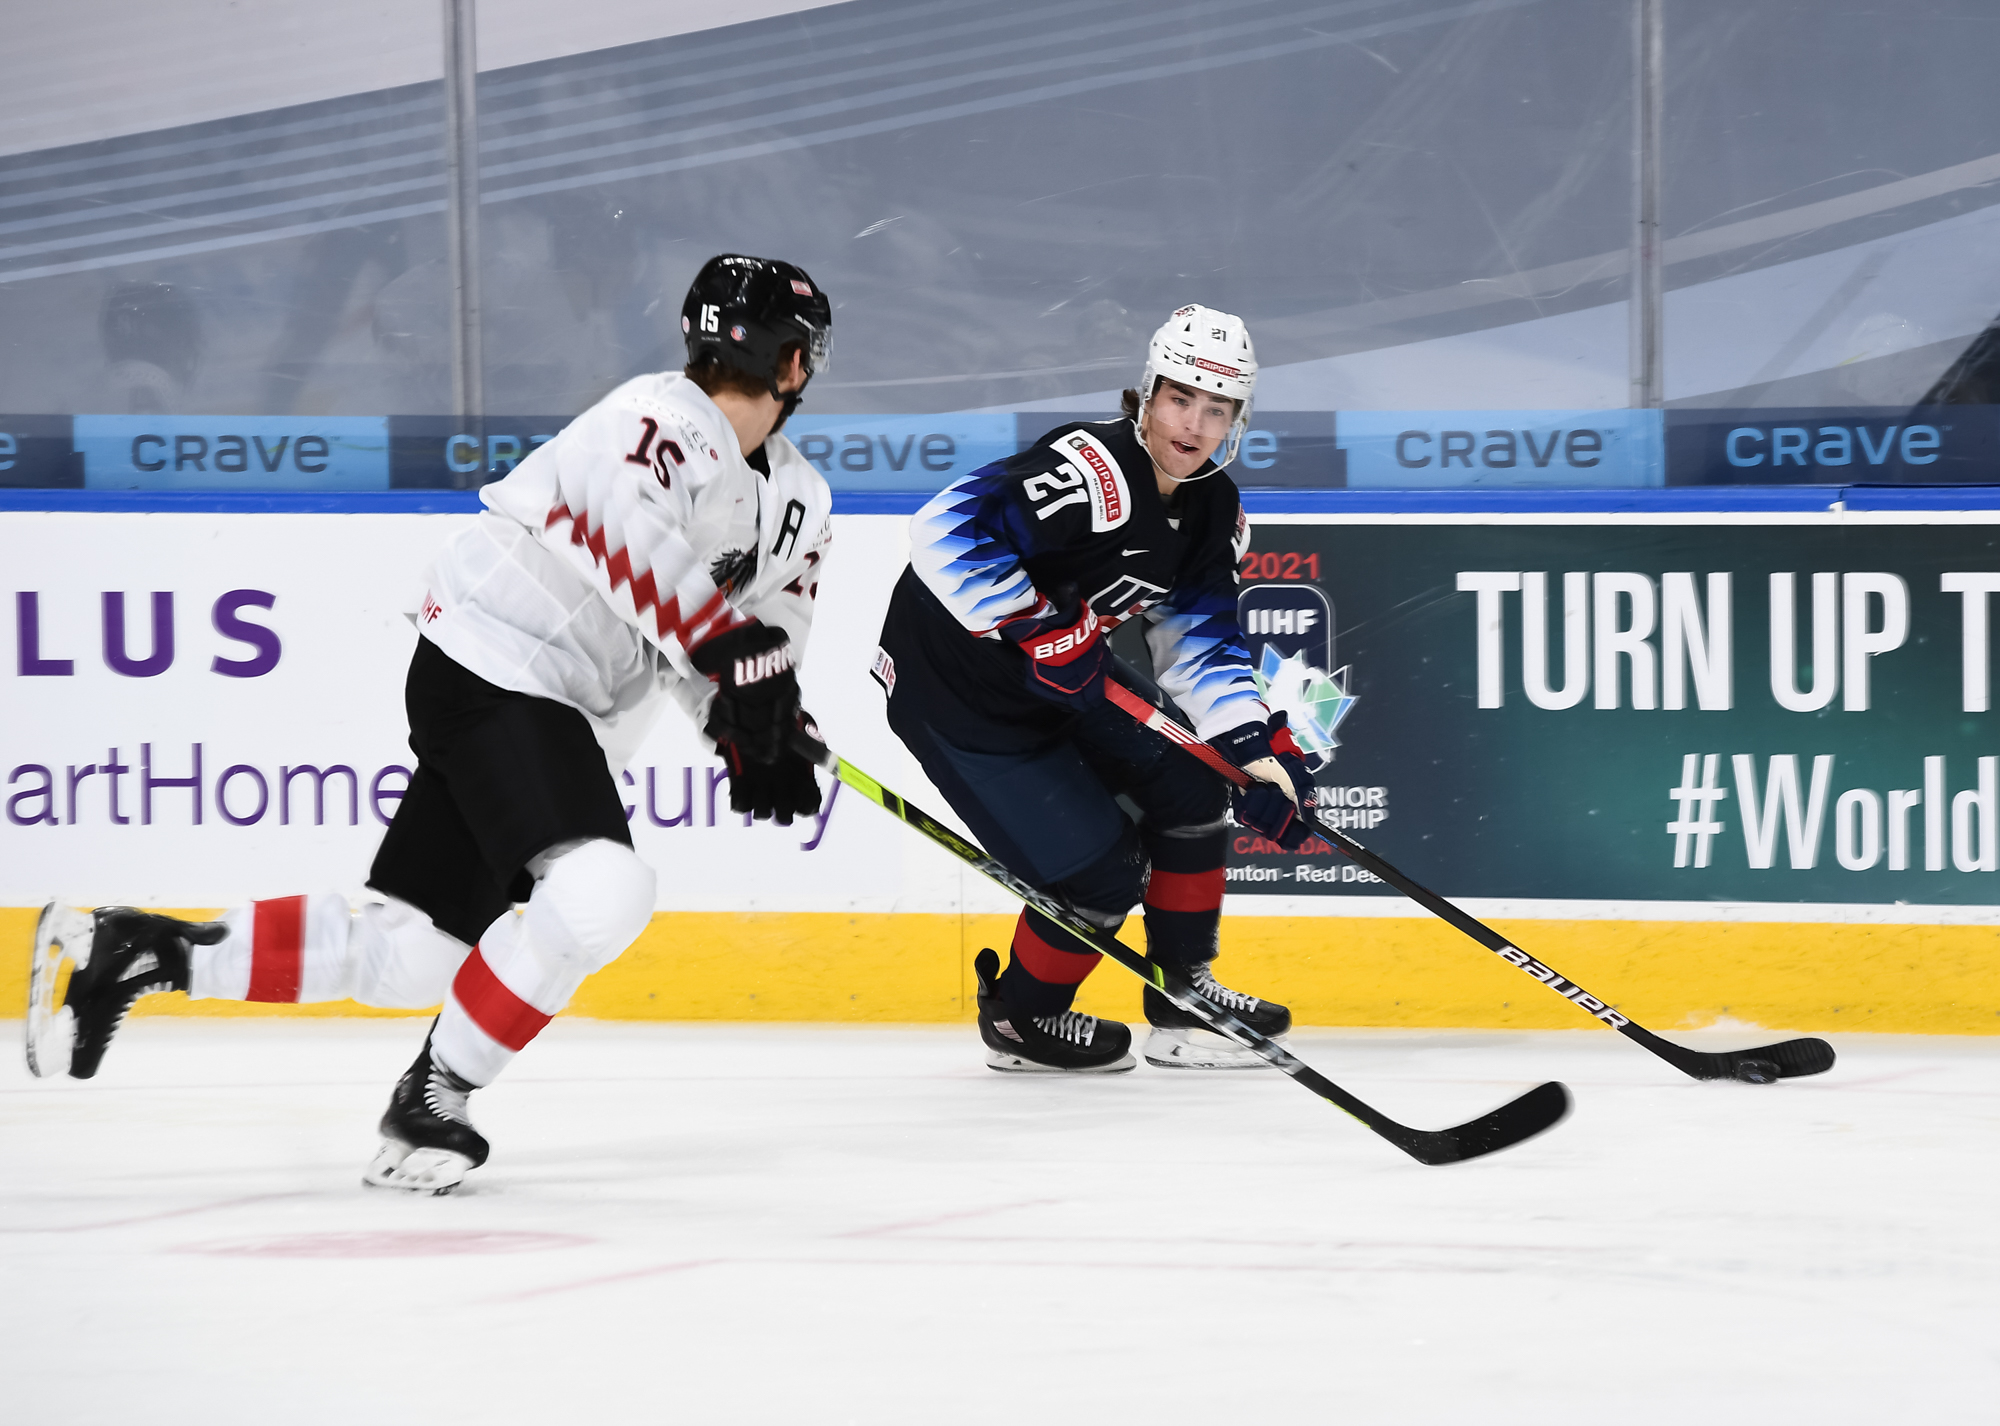 U.S. beats Canada plus 5 quick facts from the 2021 world juniors